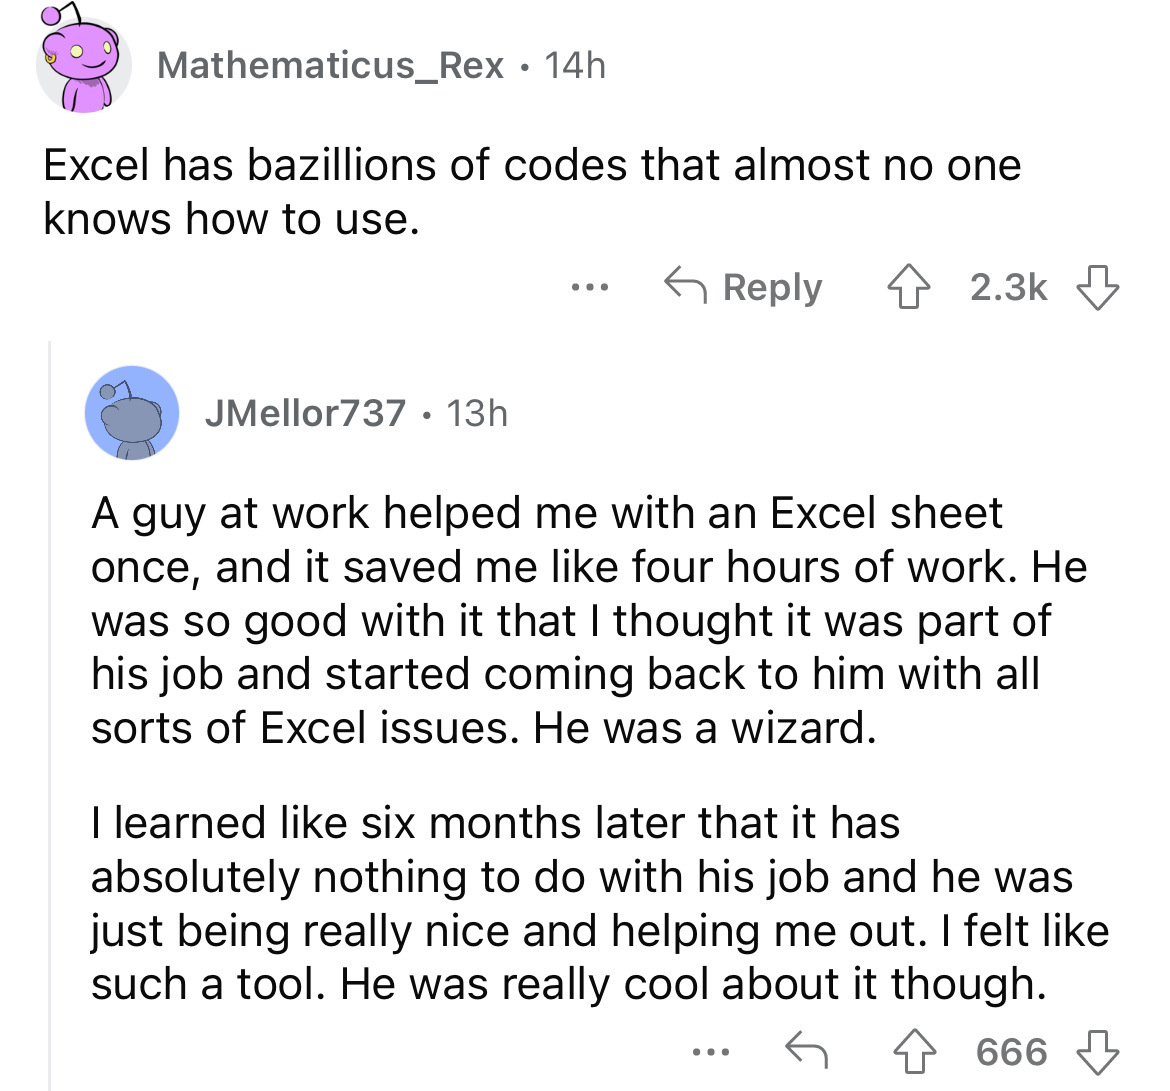 angle - Mathematicus_Rex 14h Excel has bazillions of codes that almost no one knows how to use. JMellor737 13h ... A guy at work helped me with an Excel sheet once, and it saved me four hours of work. He was so good with it that I thought it was part of h